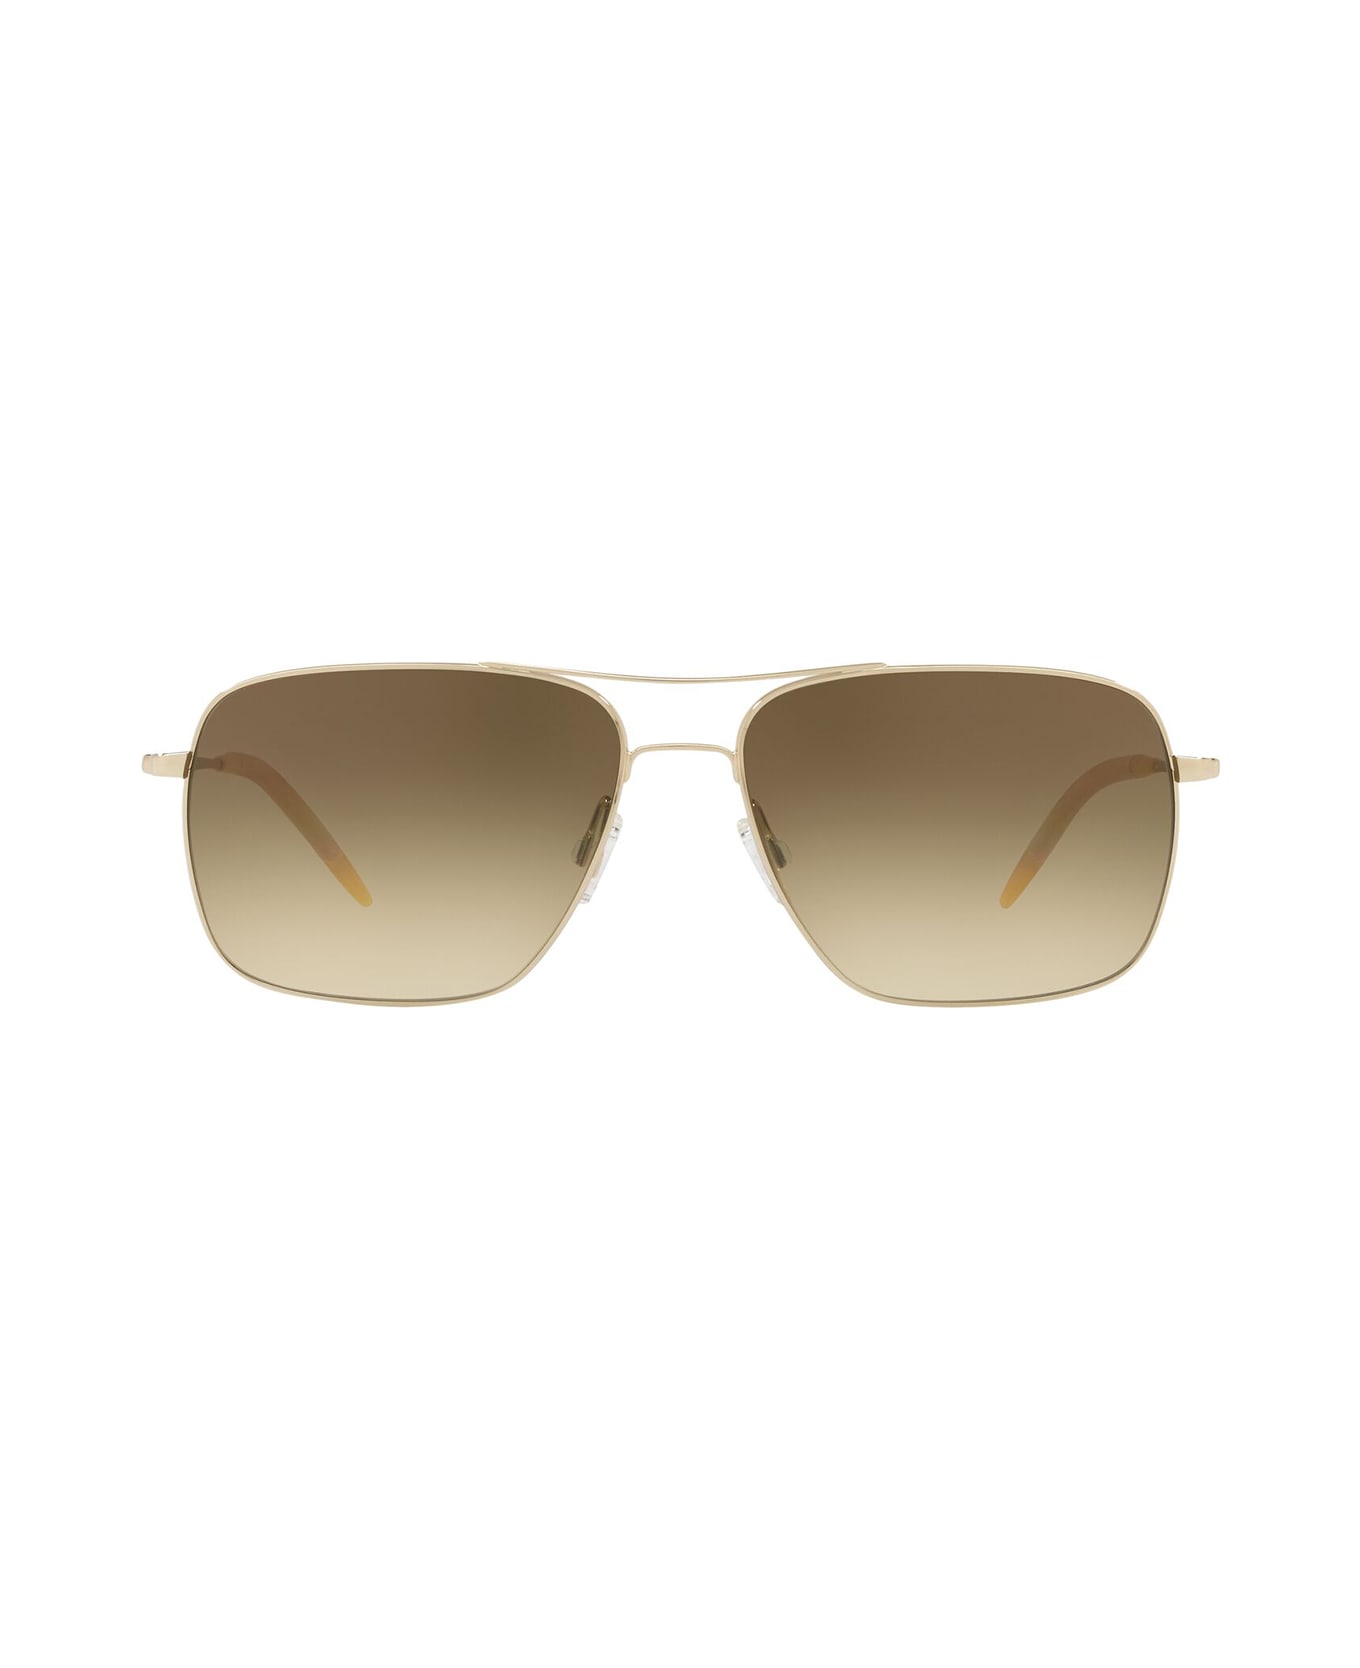 Oliver Peoples Ov1150s Gold Sunglasses - Gold サングラス